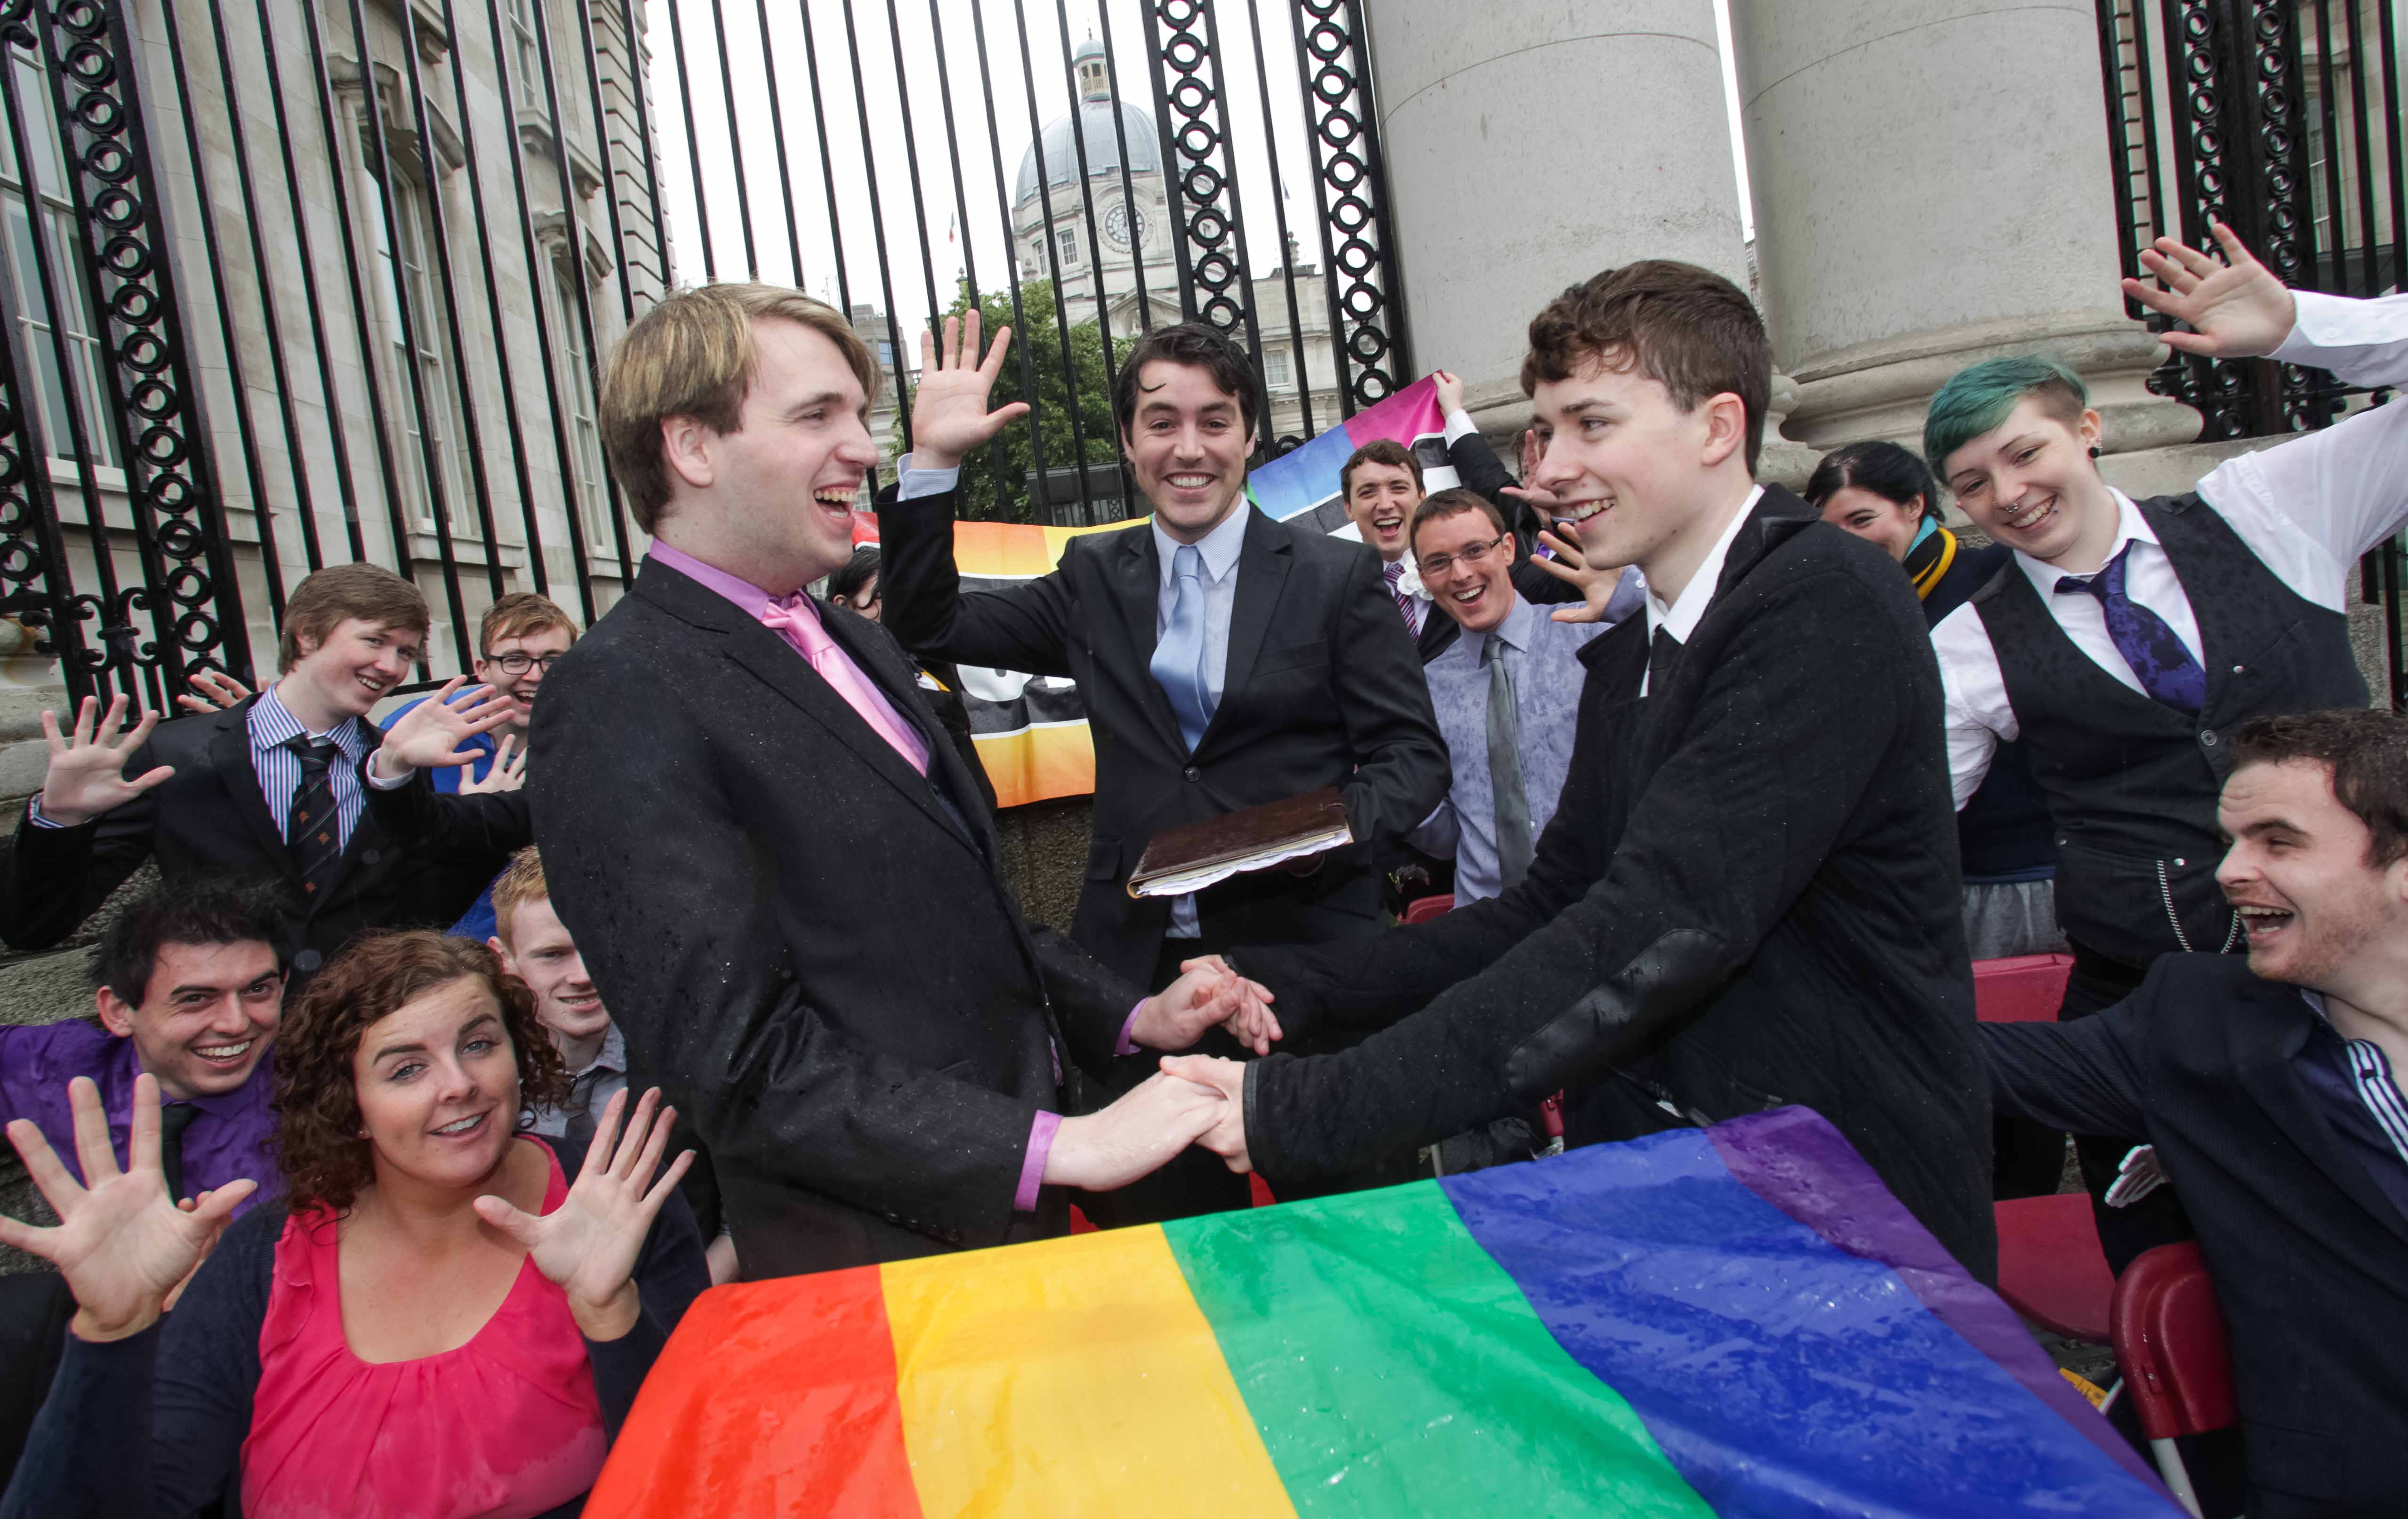 The gays in Ireland weren't messing around. Several of them have already gotten gay-married.